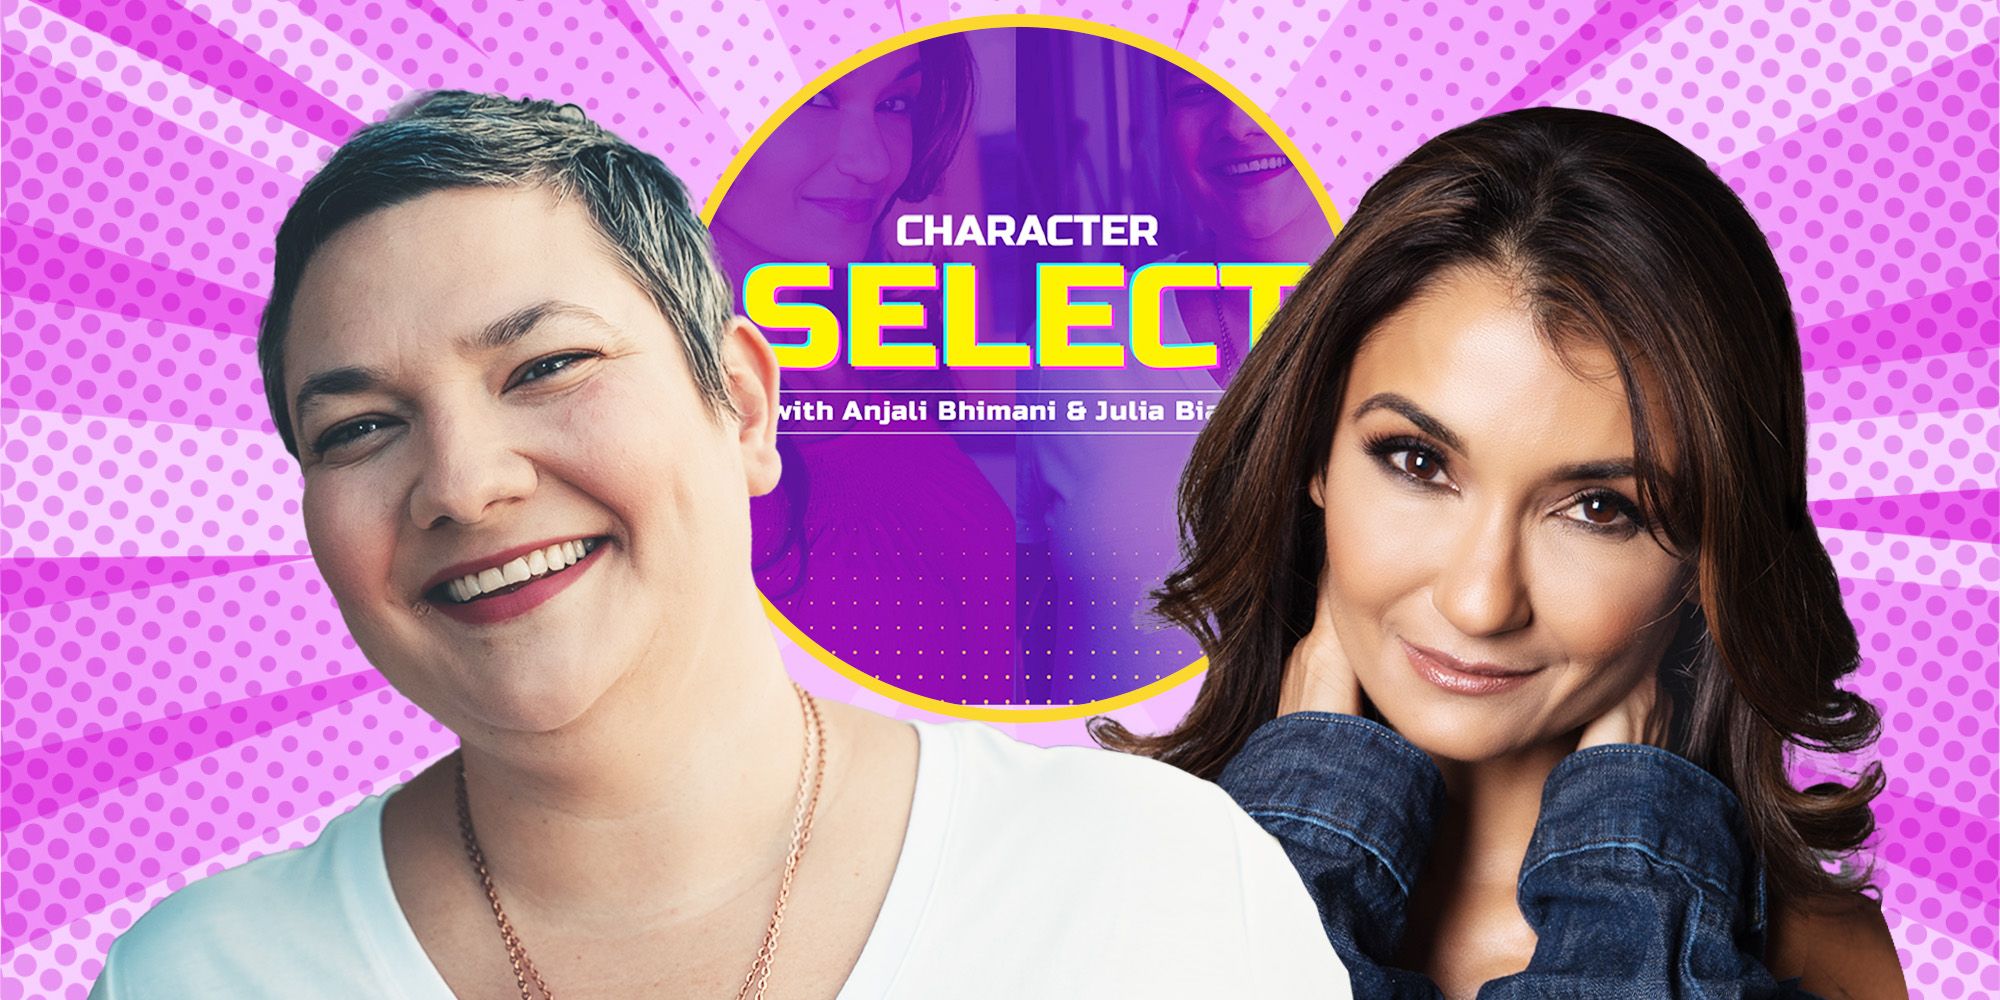 Character Select Podcast title logo in the middle and Julia Bianco on the left and Anjali Bhimani on the right.